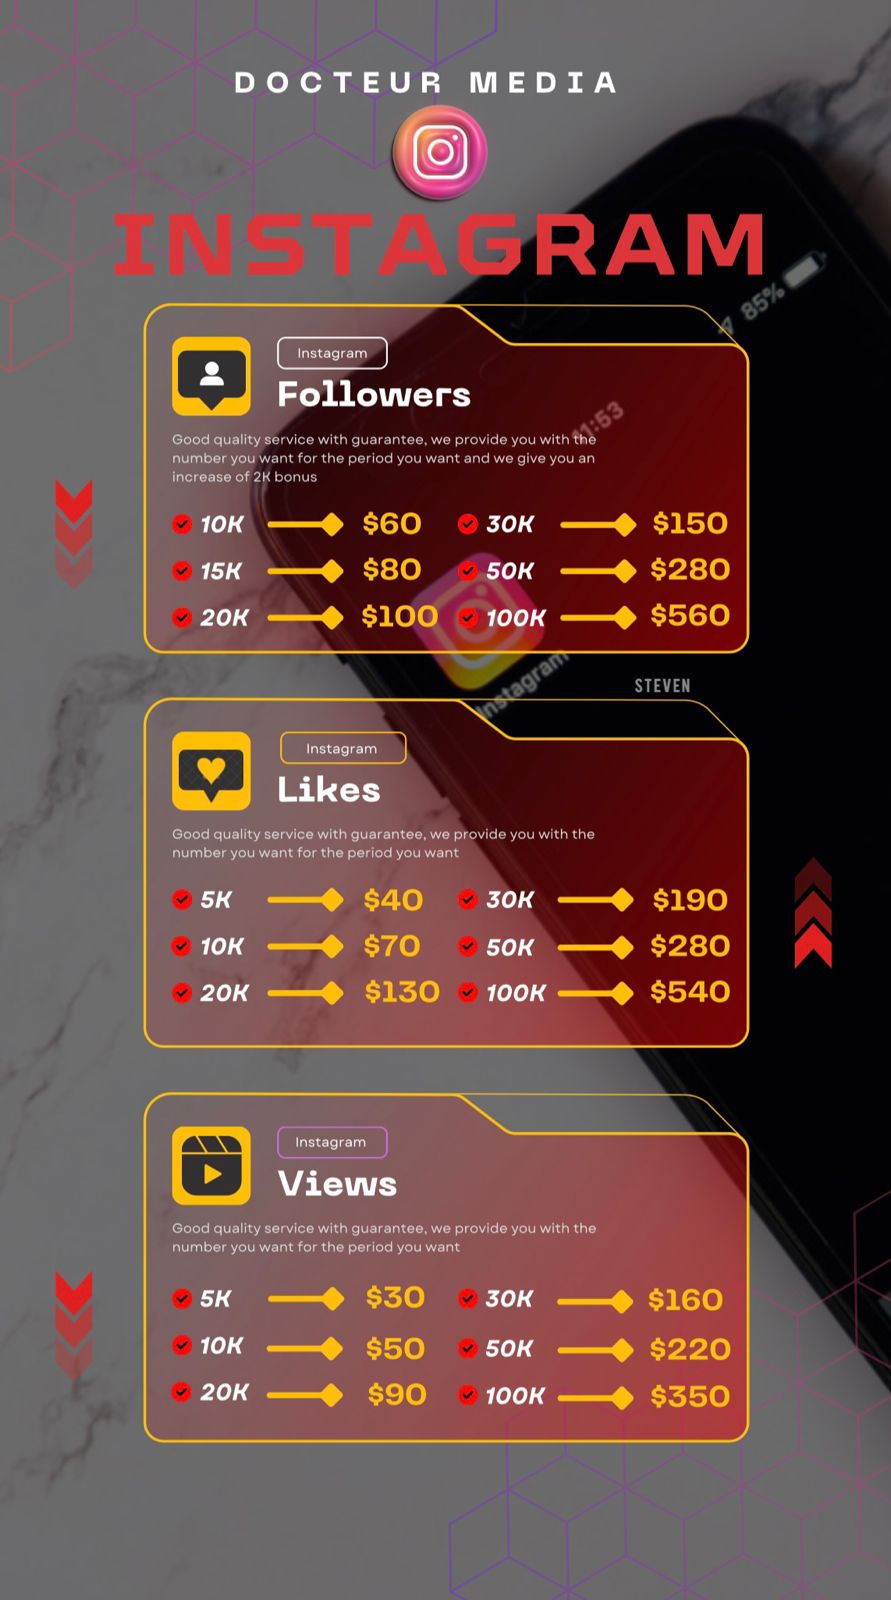 Increase Instagram followers, likes and views